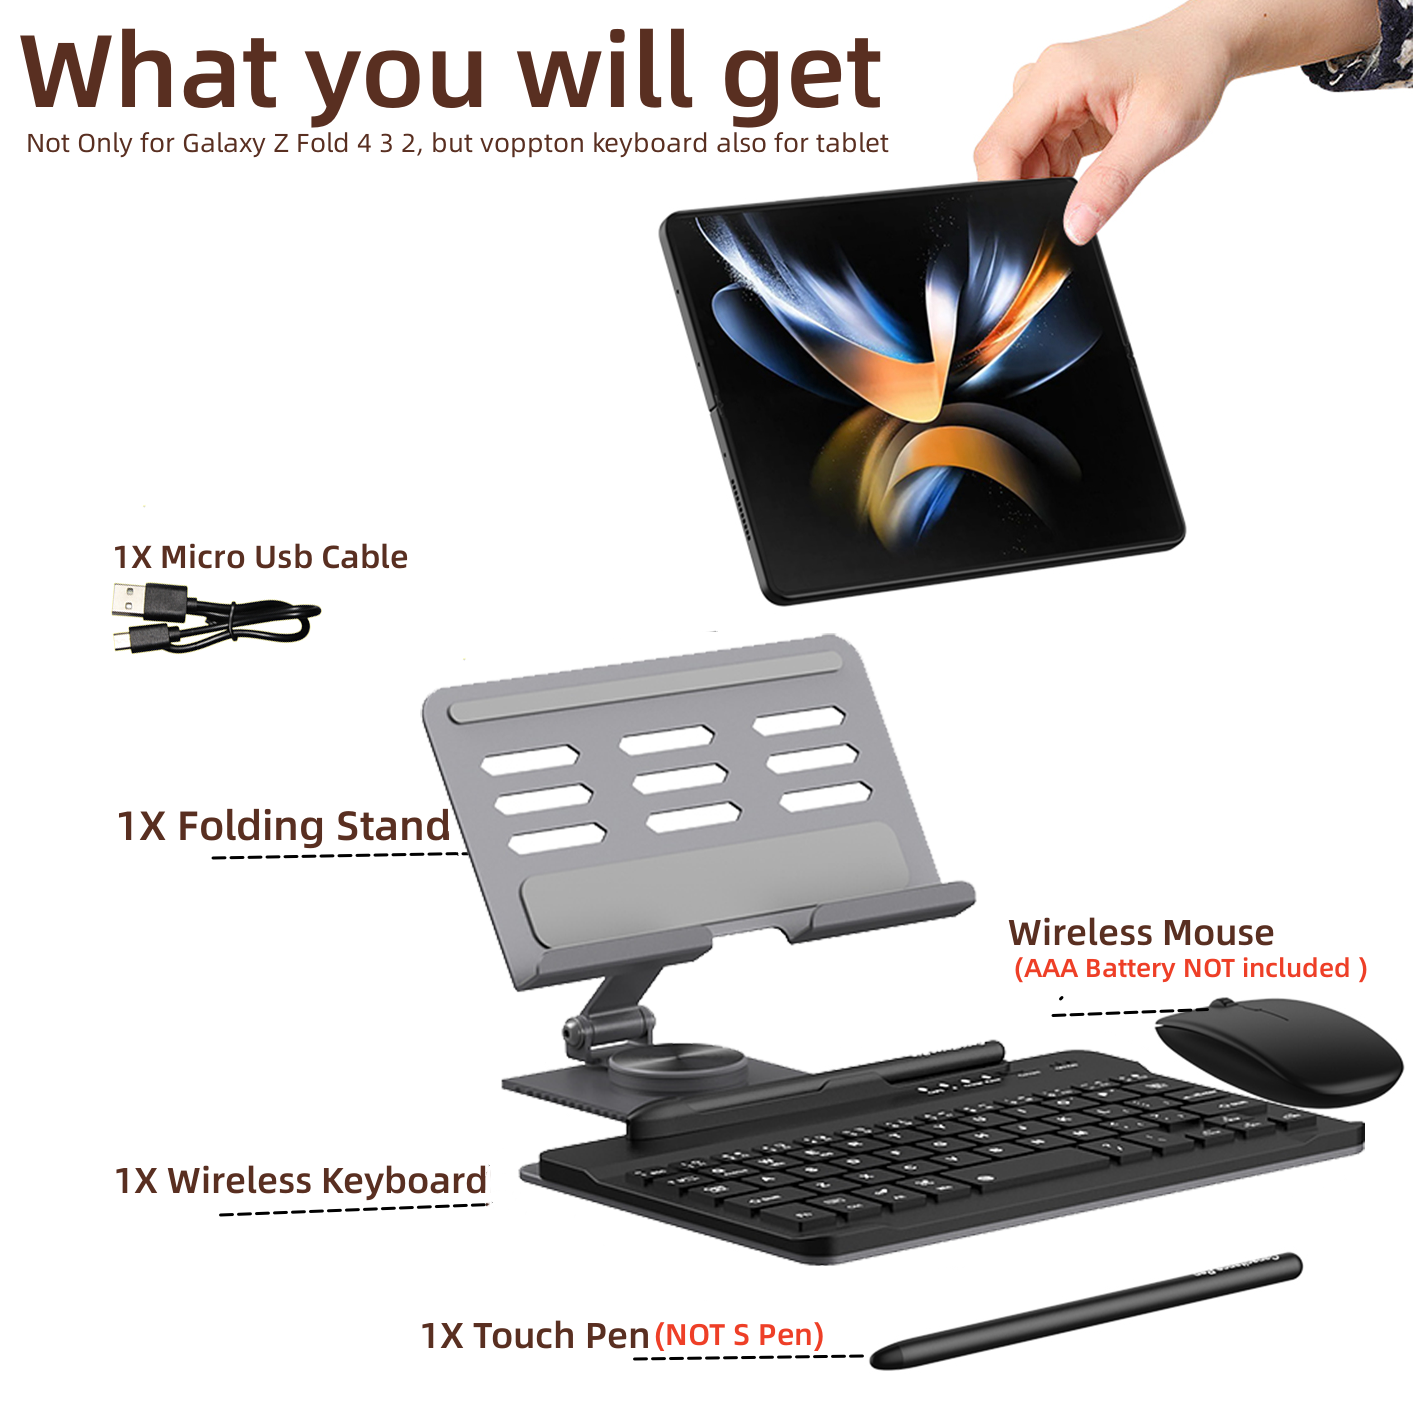 Wireless Keyboard, Mouse, and Stand Combo for Galaxy Z Phones - 3 Functions in 1 - Brandy Trendy Hub